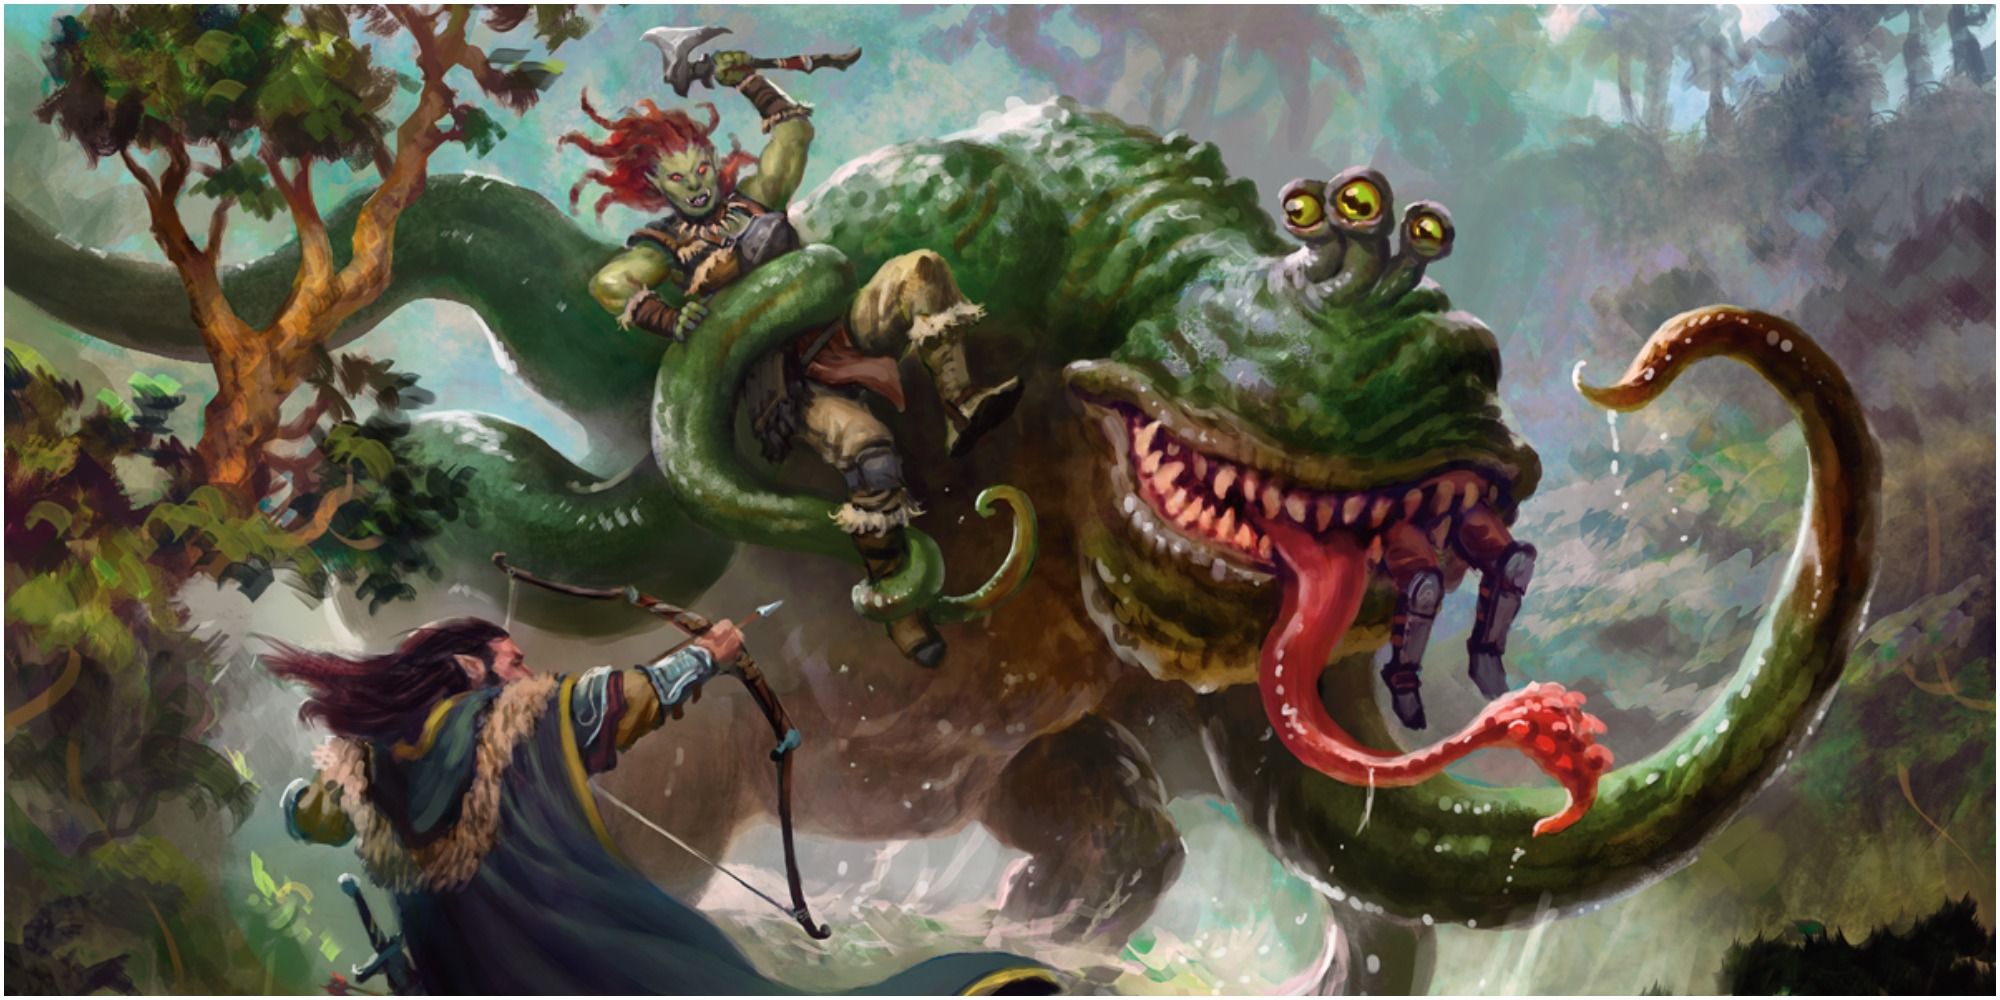 Froghemoth from D&D being attacked by an orc